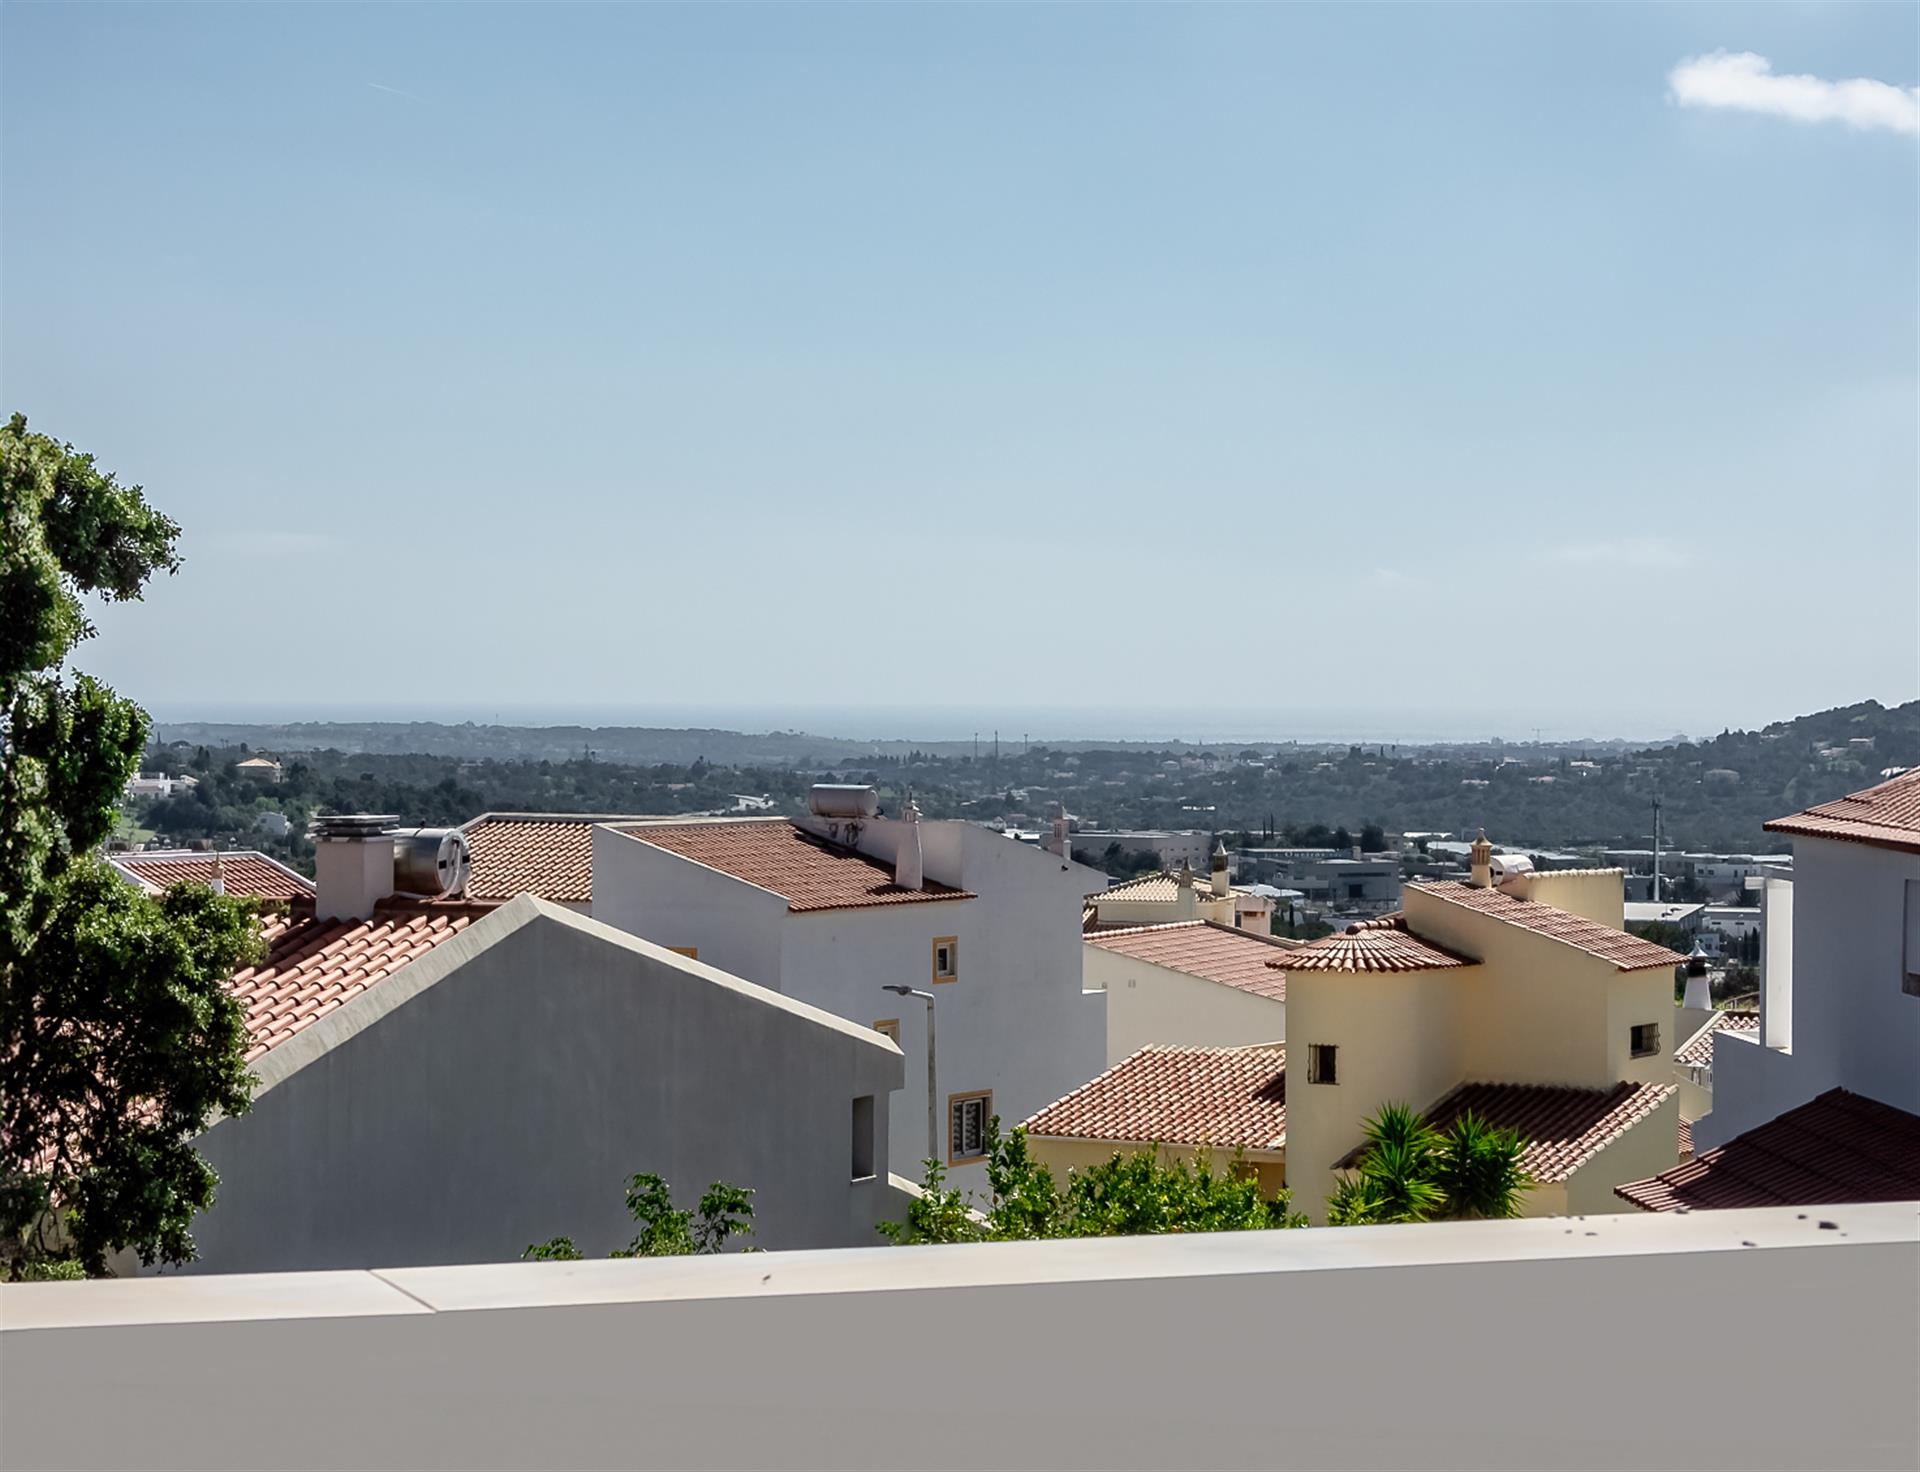 3-Bedroom duplex flat with panoramic sea views, Jacuzzi